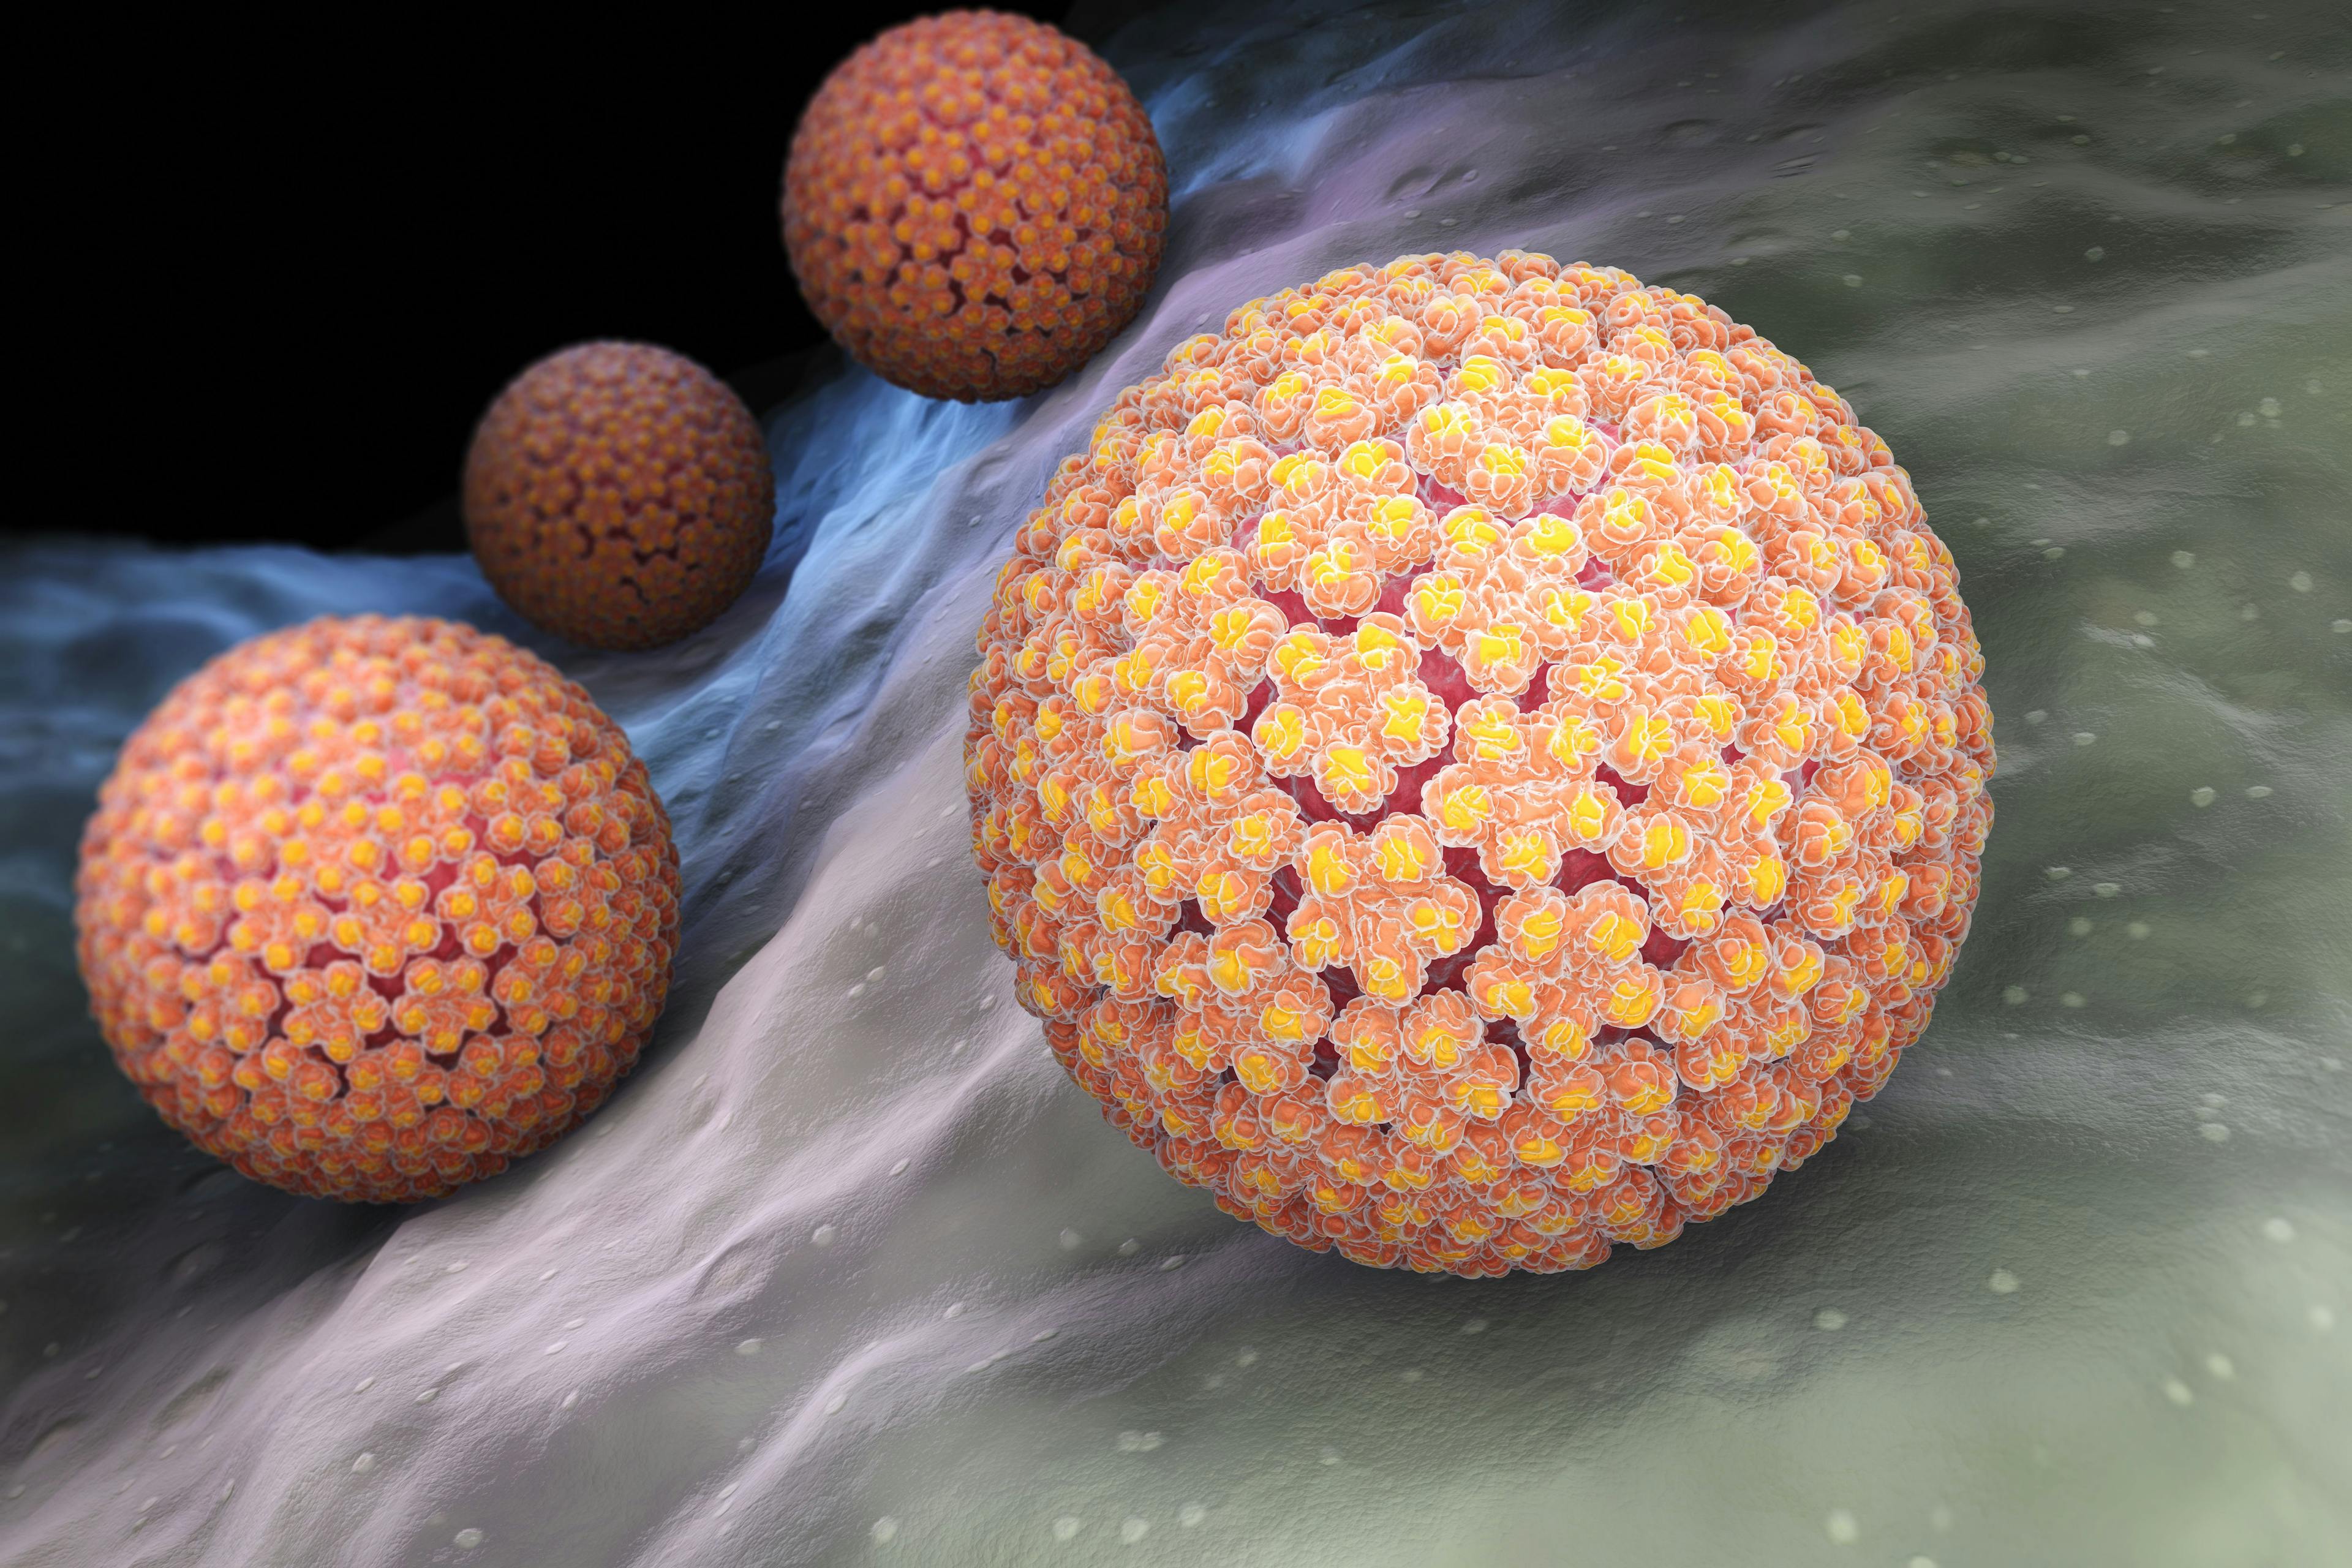 Trial Underway for Novel Agent Plus Immunotherapy for HPV-Related Head and Neck Cancer